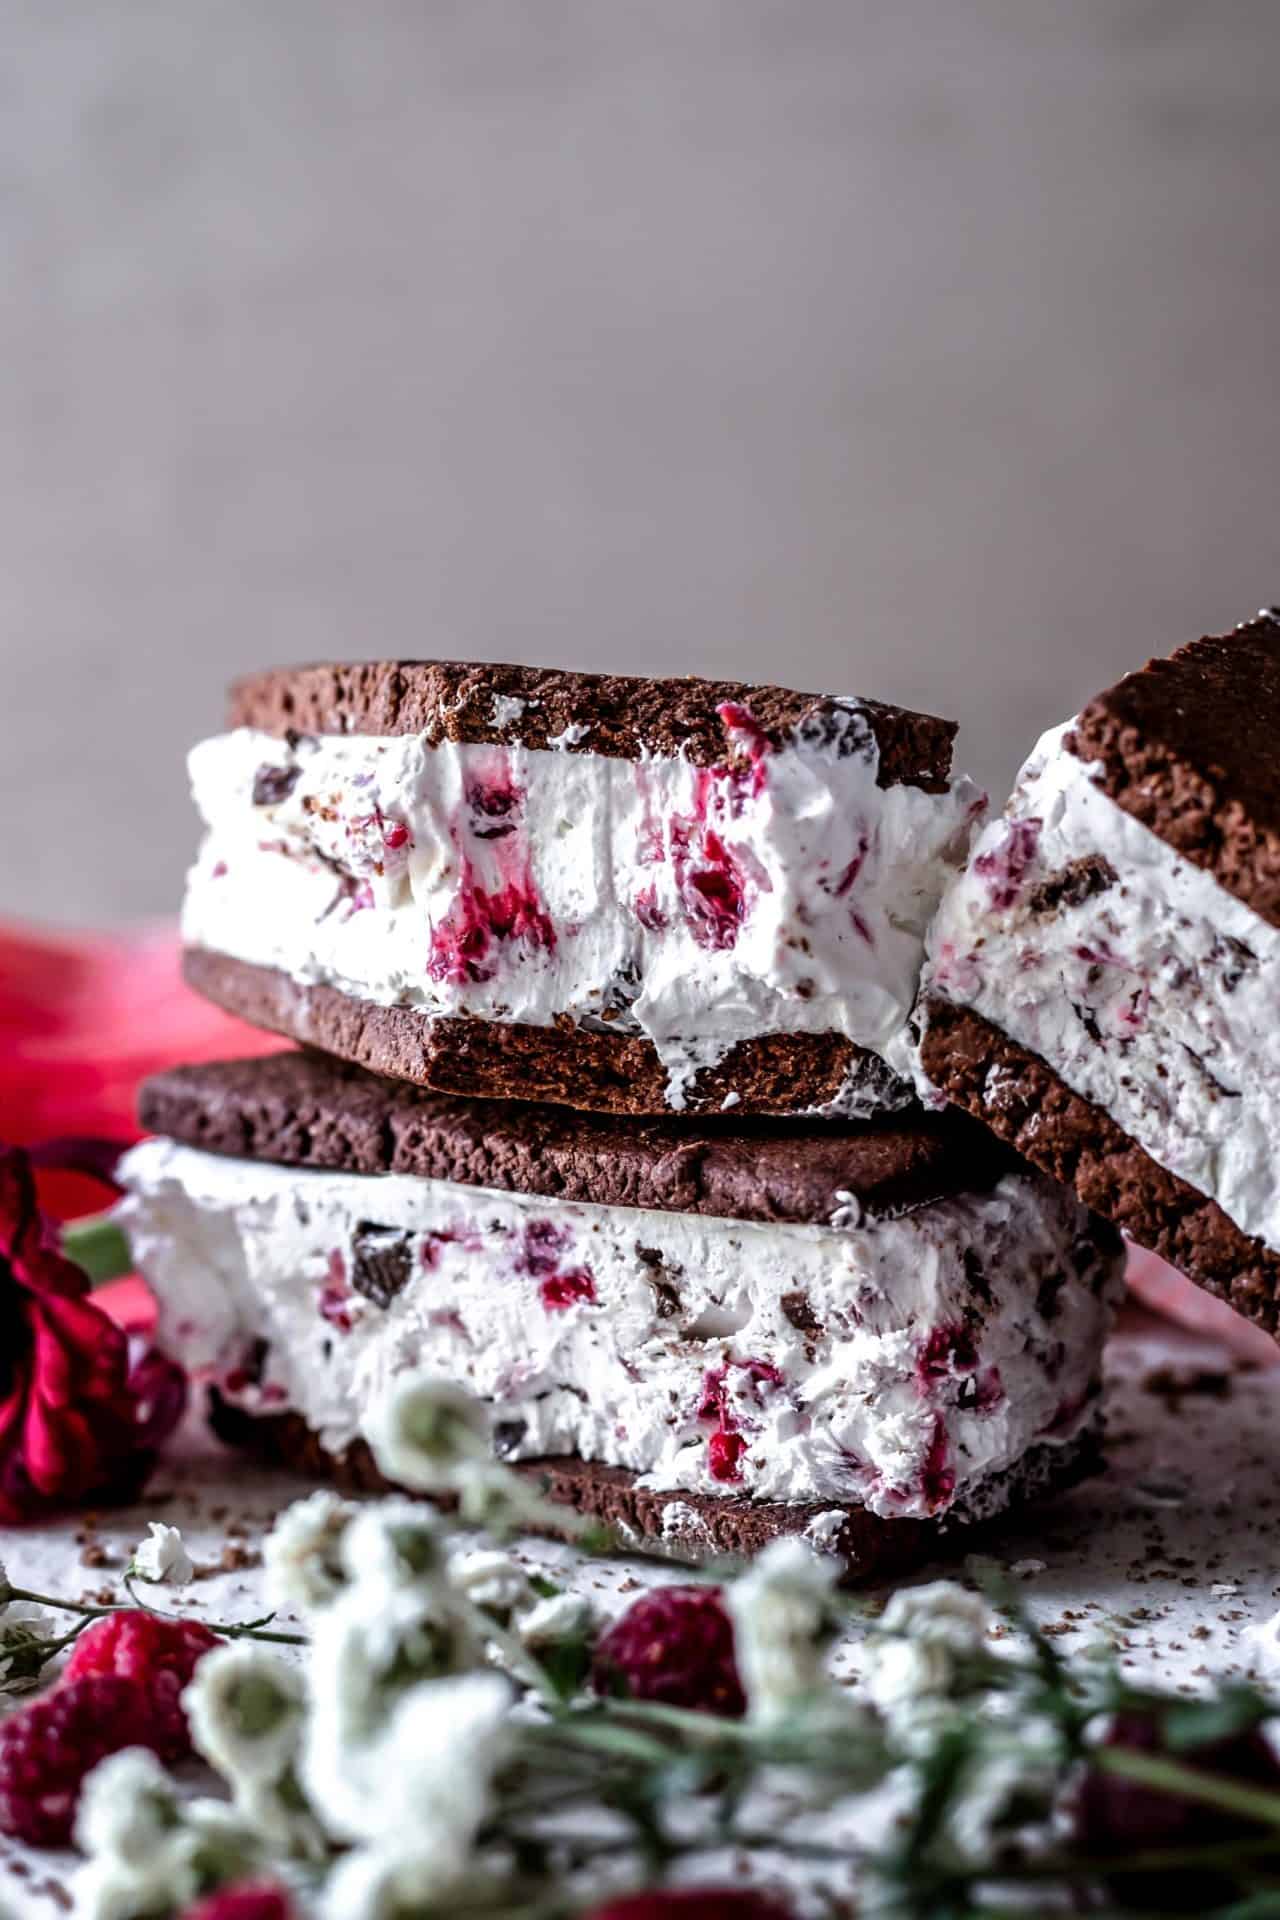 These Gluten-Free Ice Cream Sandwiches are low FODMAP, chocolaty, creamy, swirled with vanilla and raspberries, flavorful, and so delicious!